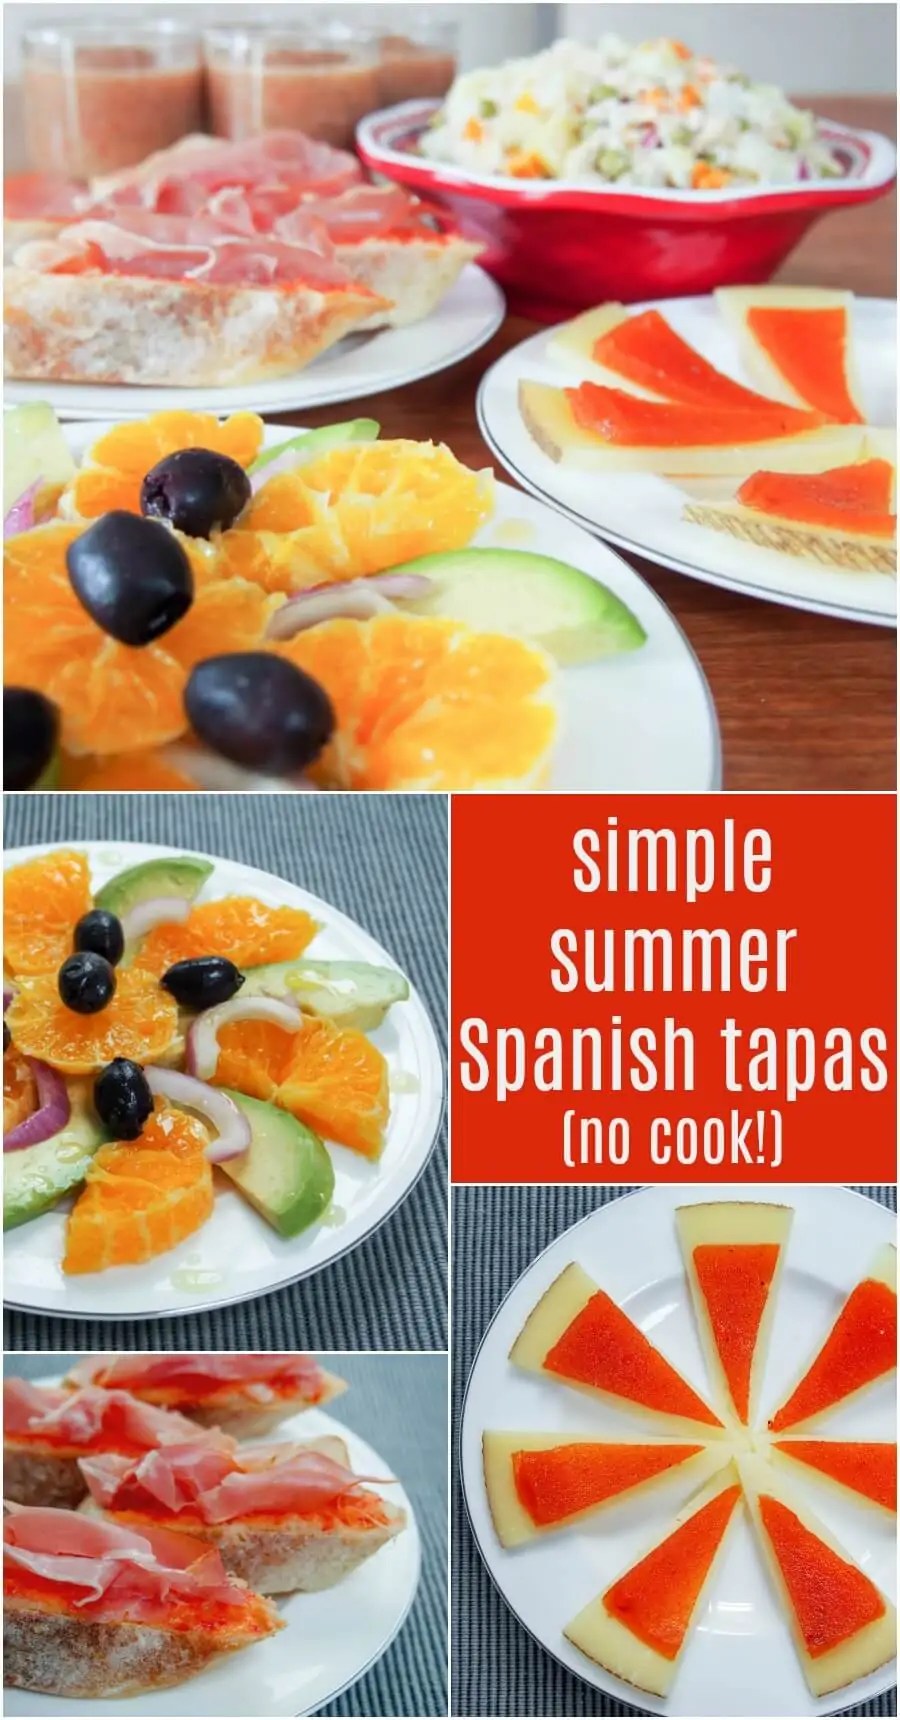 This range of simple summery Spanish tapas are perfect for a warm day when you don